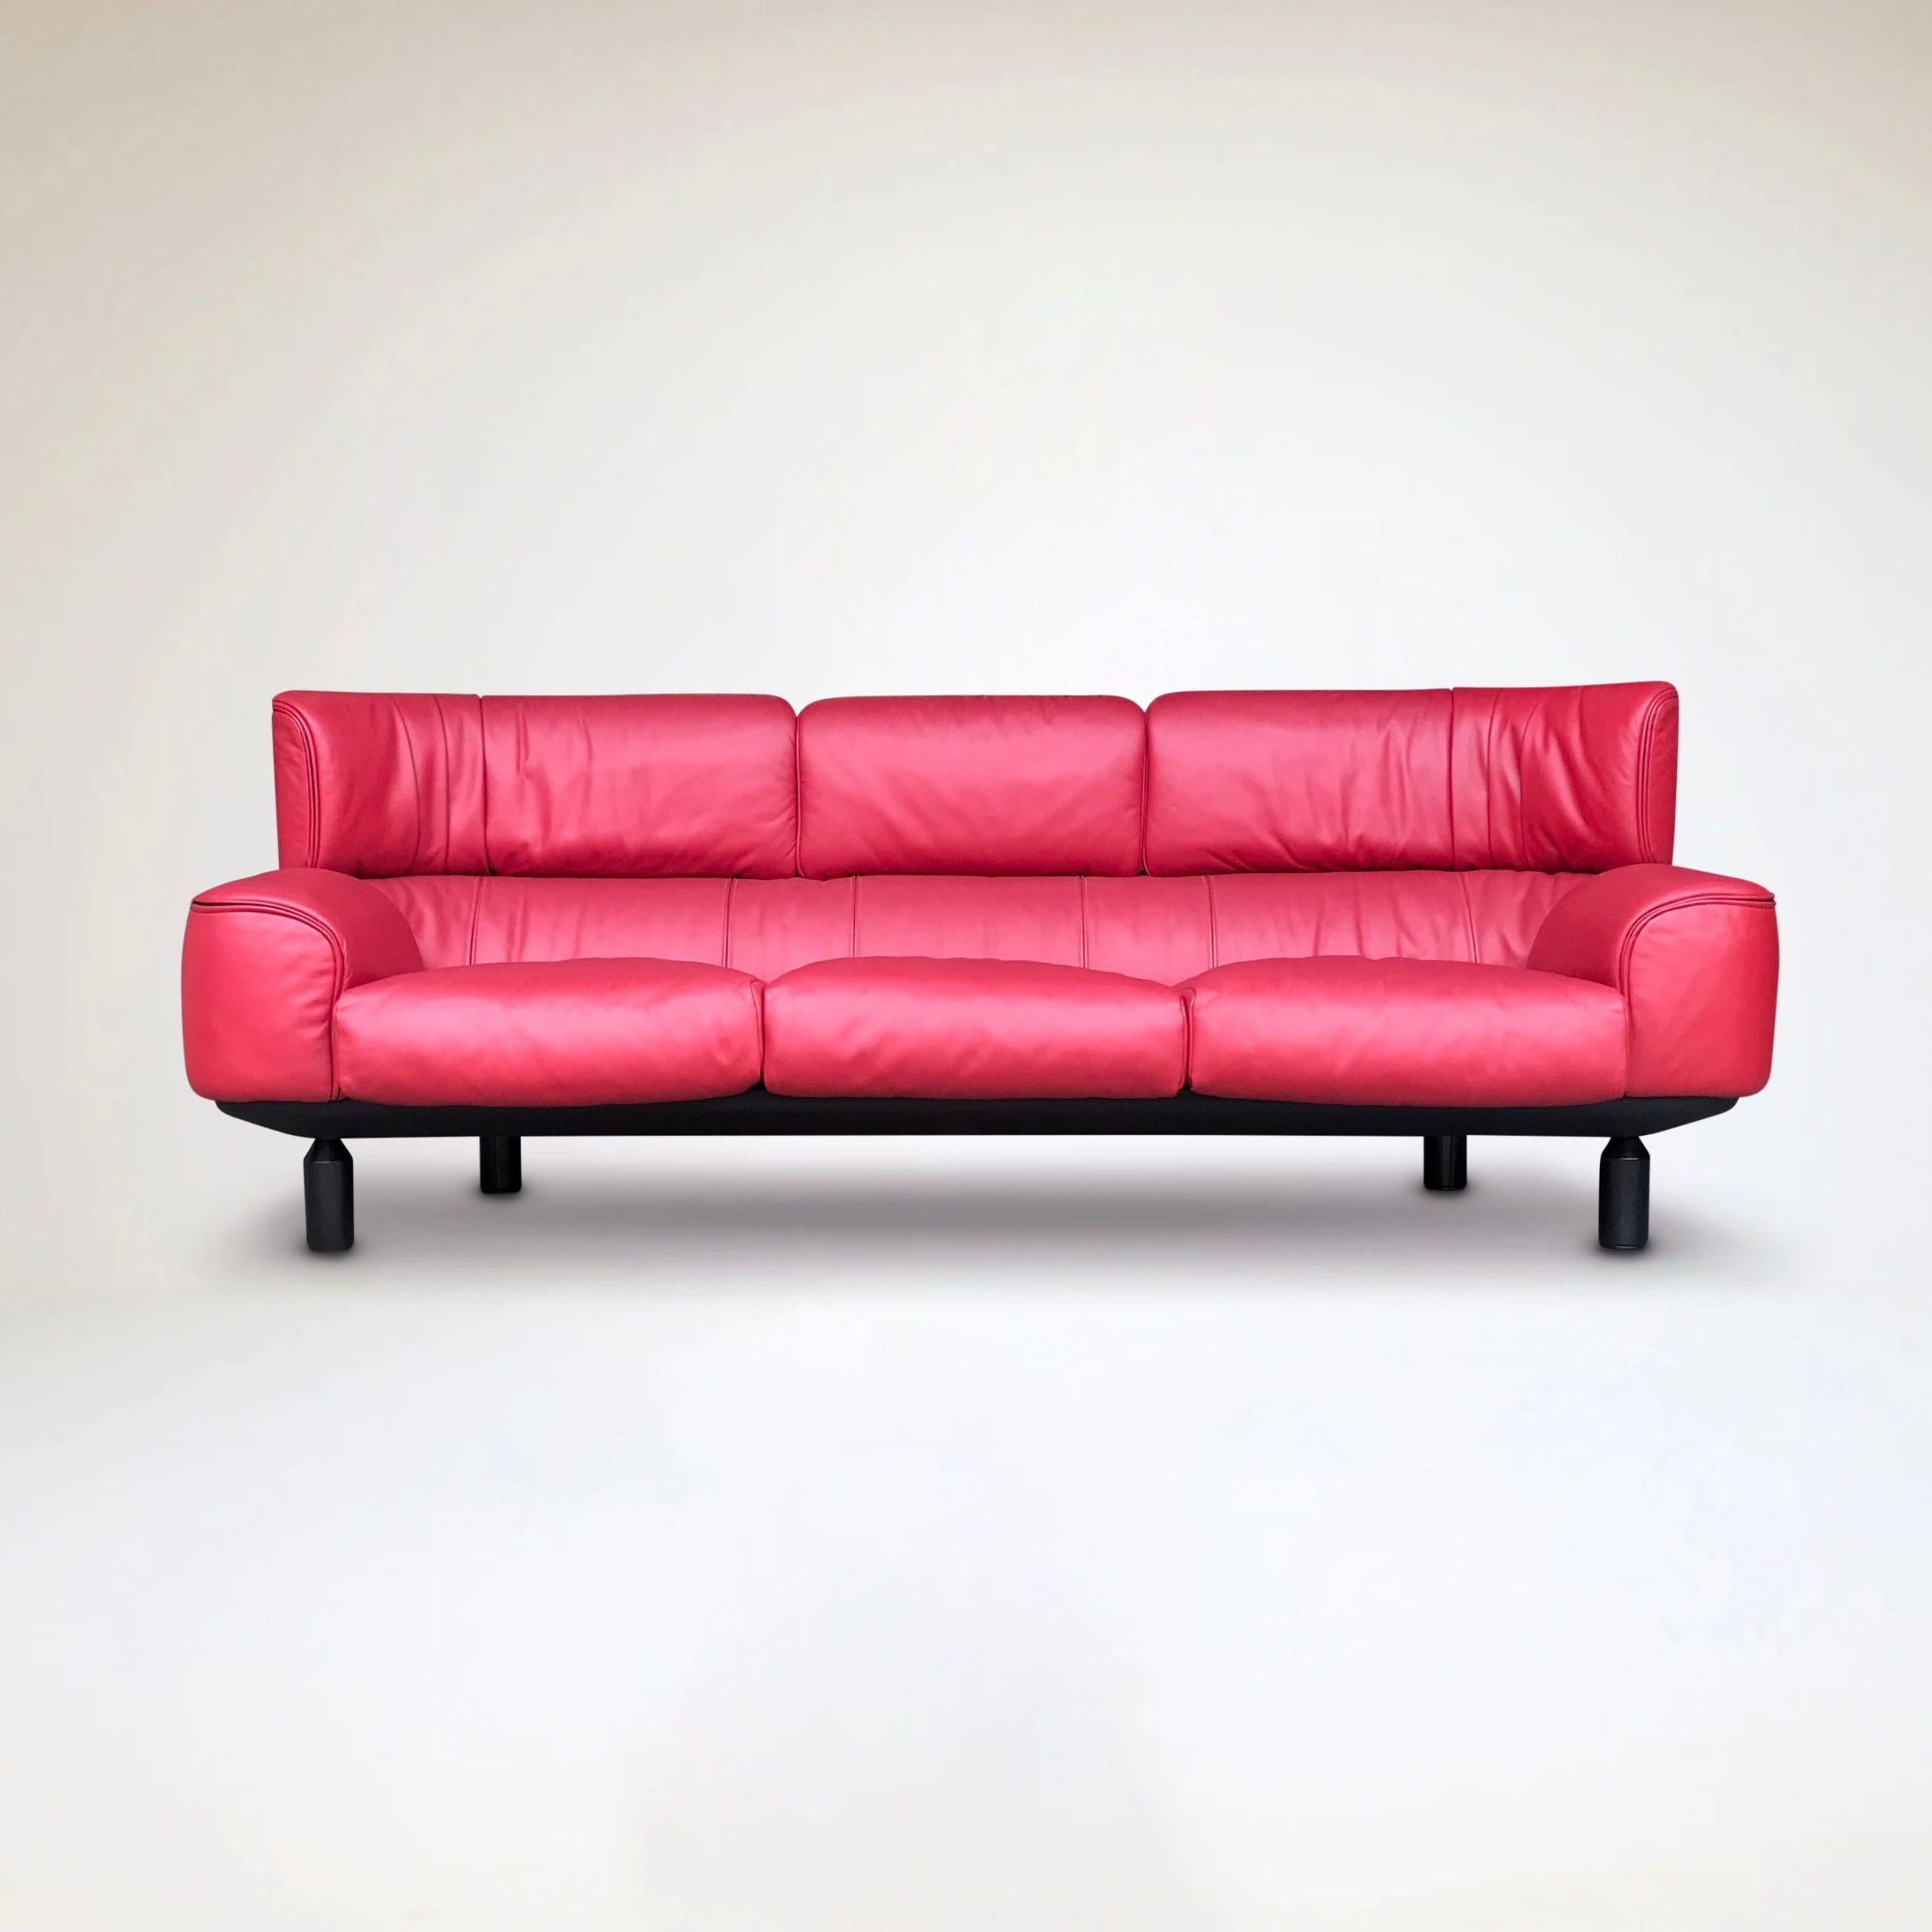 A timeless design by infamous Italian designer Gianfranco Frattini (1926-2004) for Cassina; the Bull sofa. Only produced in 1987 by Cassina, this design is becoming increasingly rare.

Remarkable about this design is that armrest, backrest and